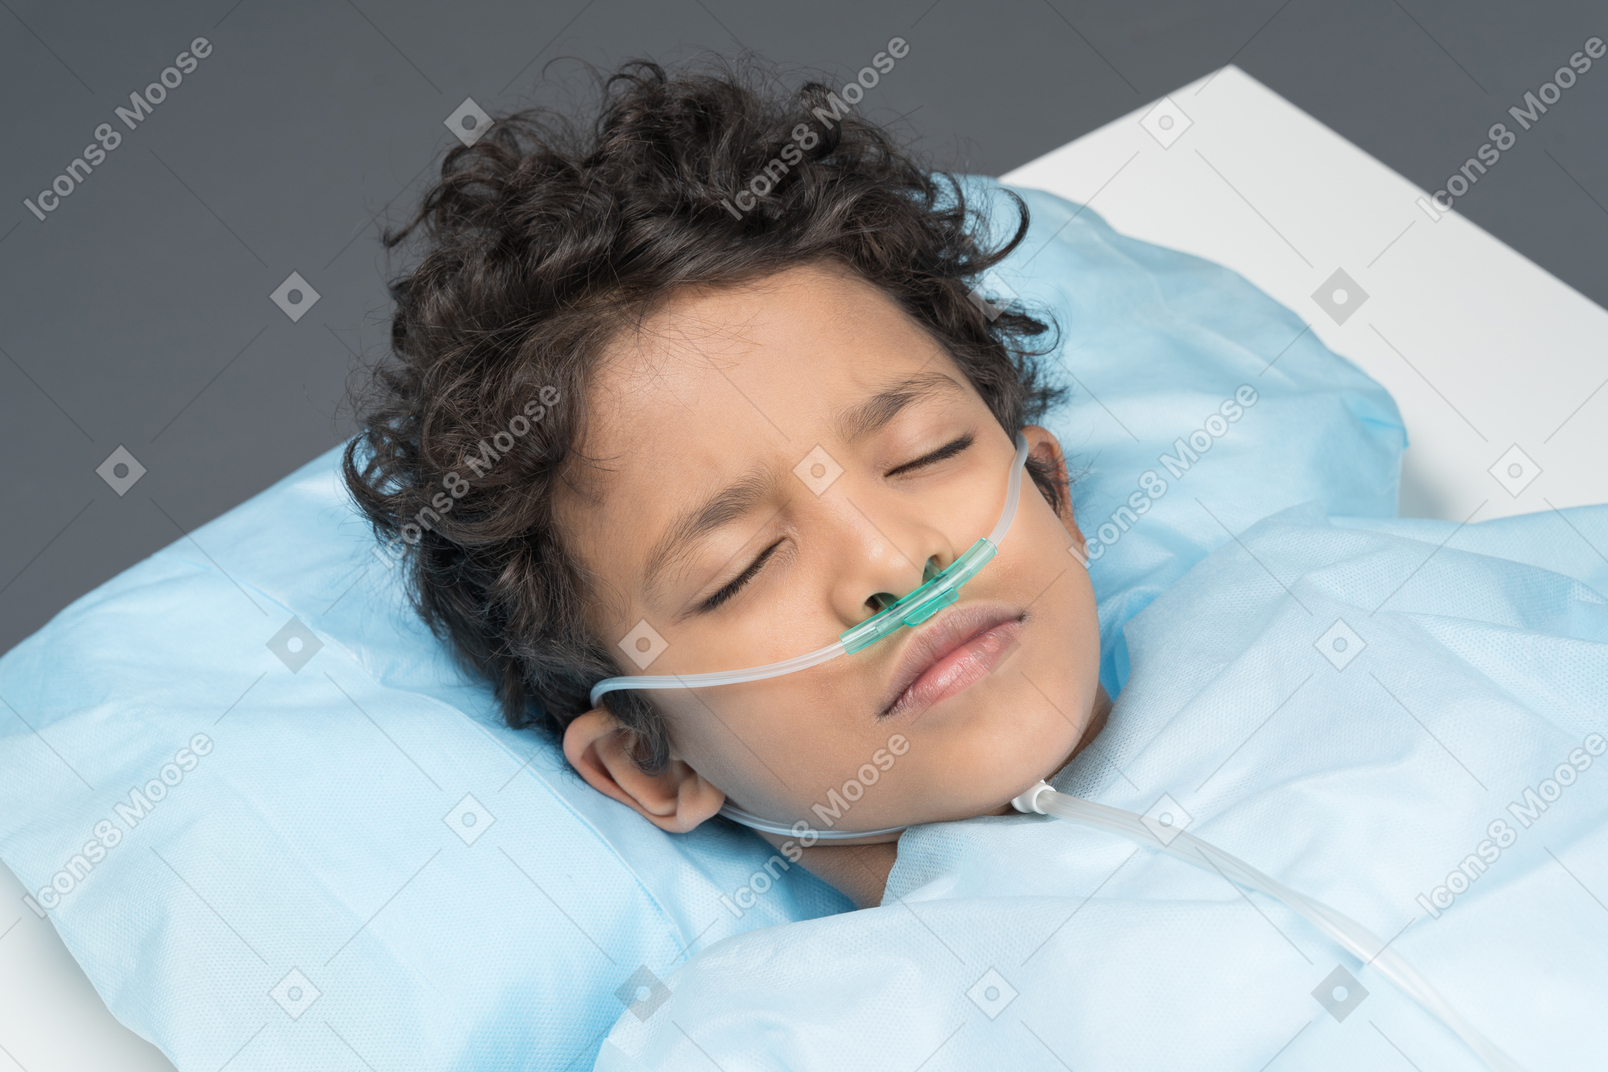 Little boy on operating table